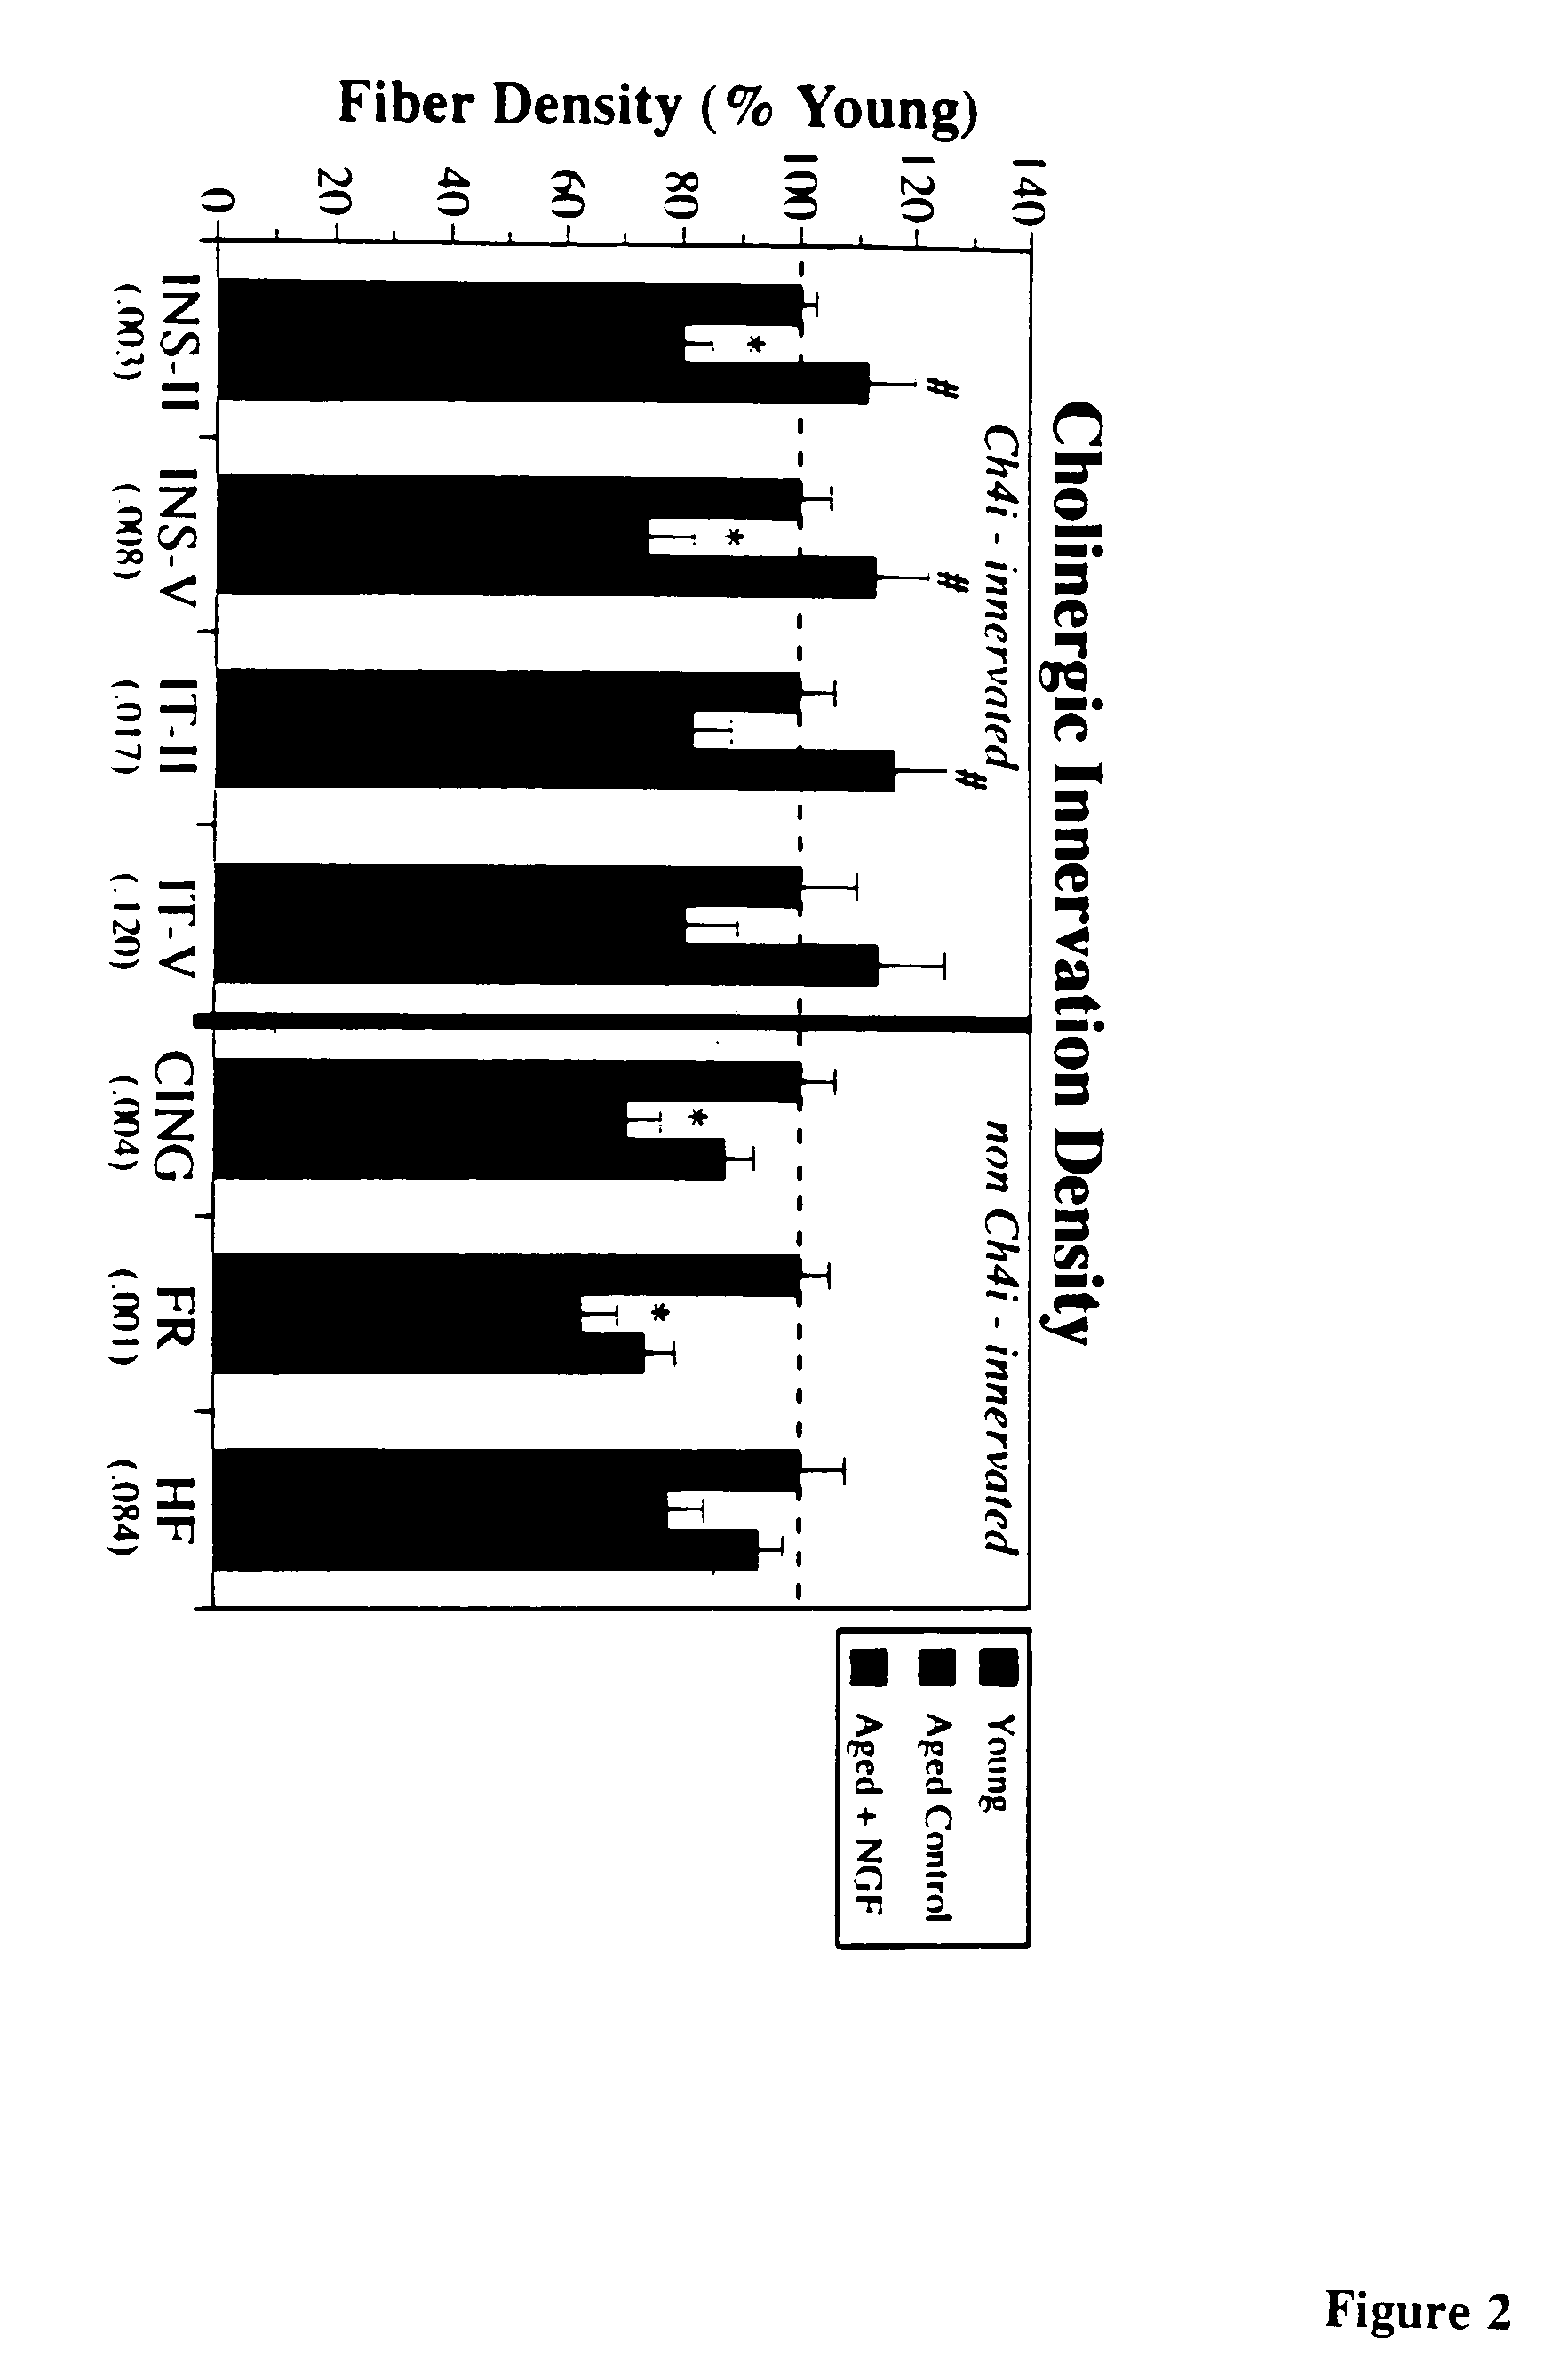 Methods for modulation of the effects of aging on the primate brain